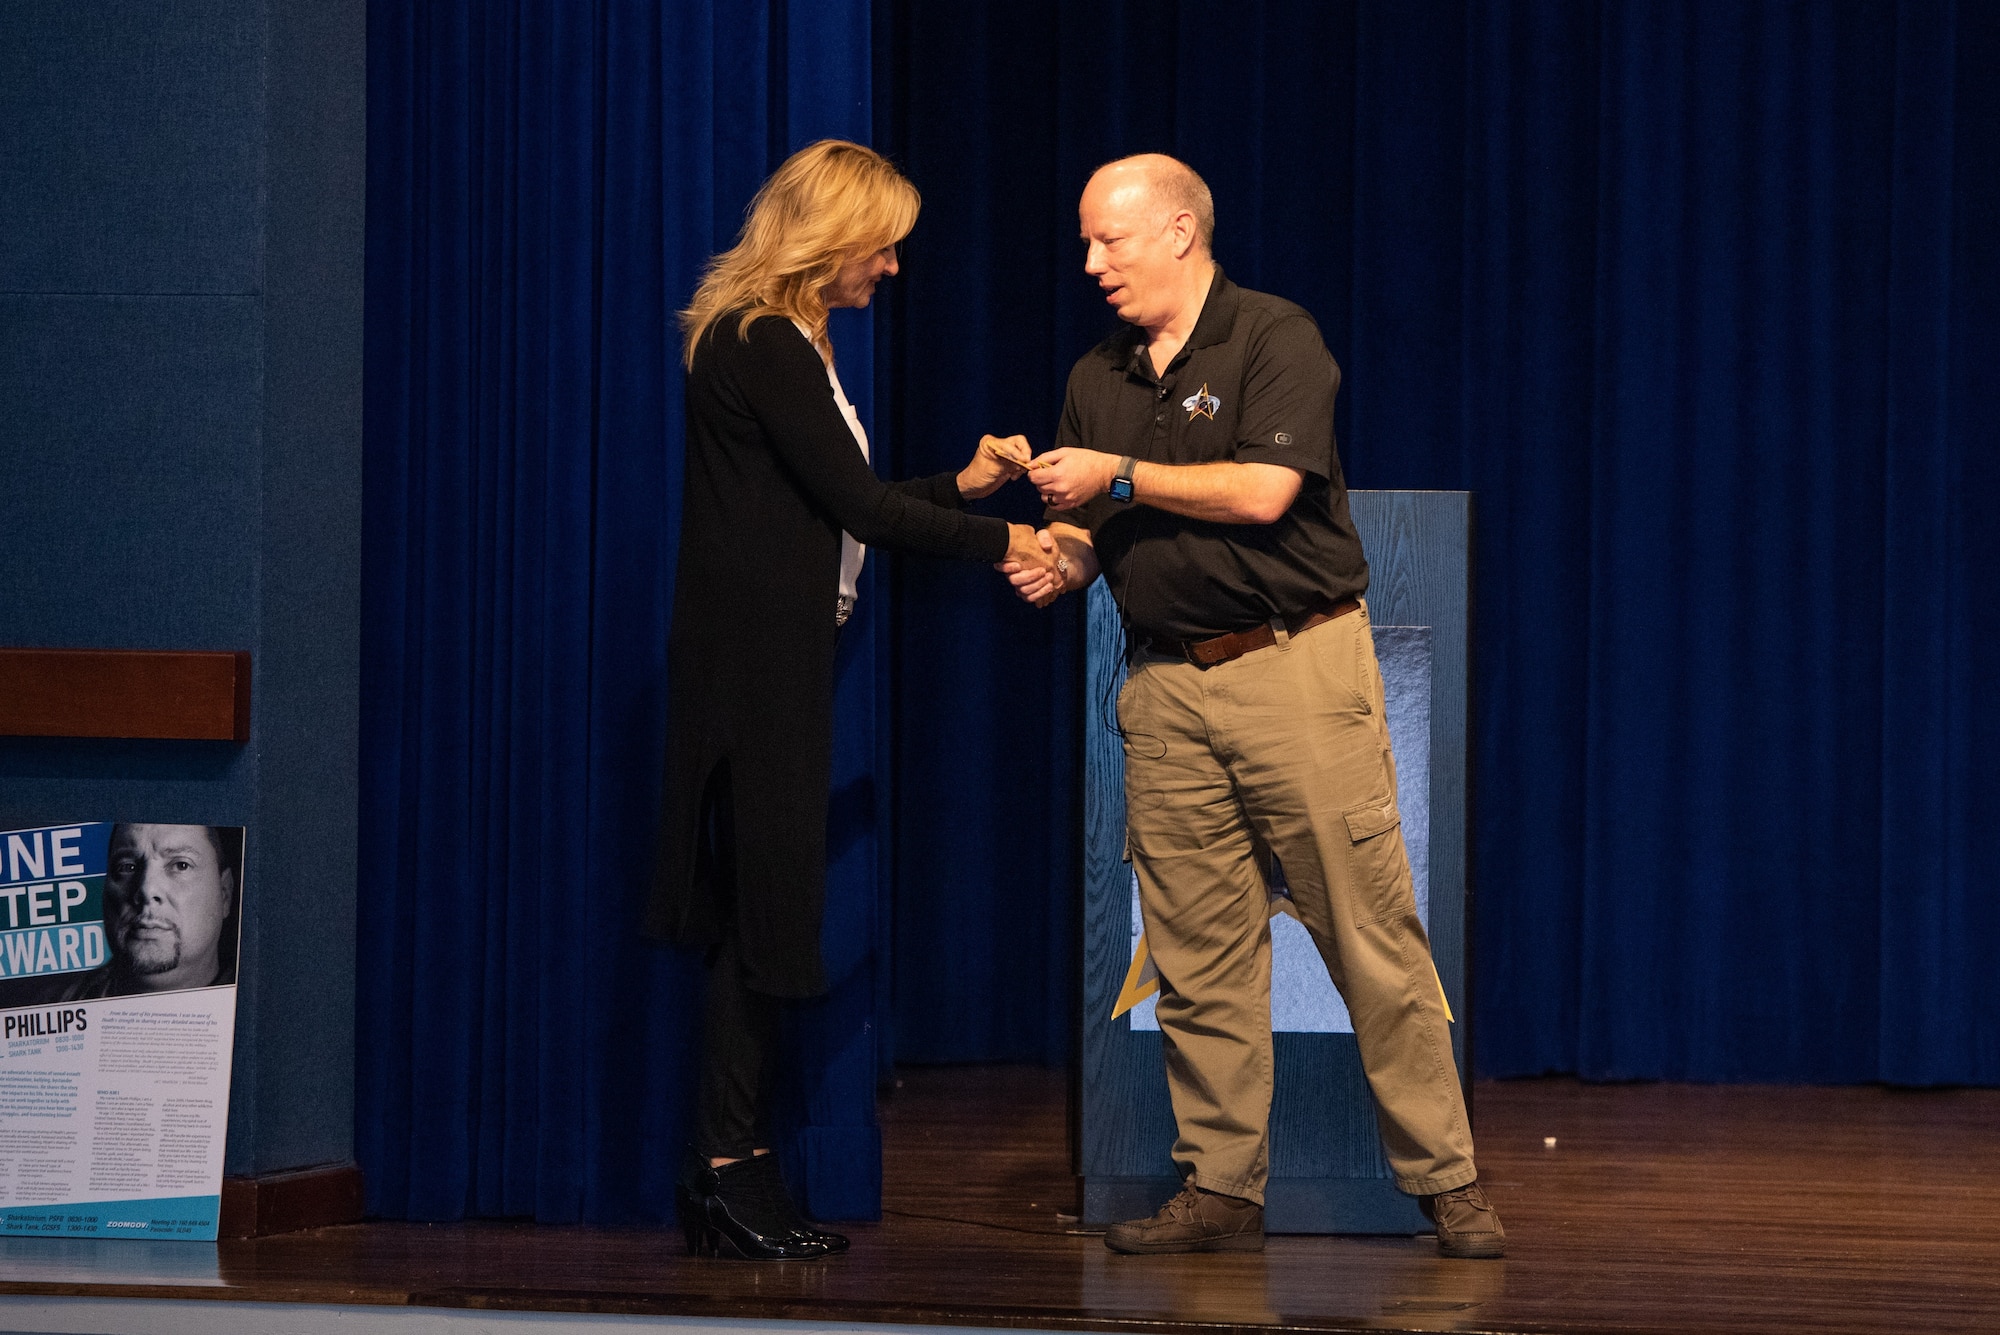 U.S. Space Force Brig. Gen. Stephen Purdy, right, Space Launch Delta 45 commander, presents an SLD 45 patch to Elaine Larsen, a two-time world champion drag racer, April 15, 2022, during Resilience Day at Patrick Space Force Base, Florida. Larsen was one of two guest speakers at the event and spoke about overcoming adversity. (U.S. Space Force photo by Amanda Inman)